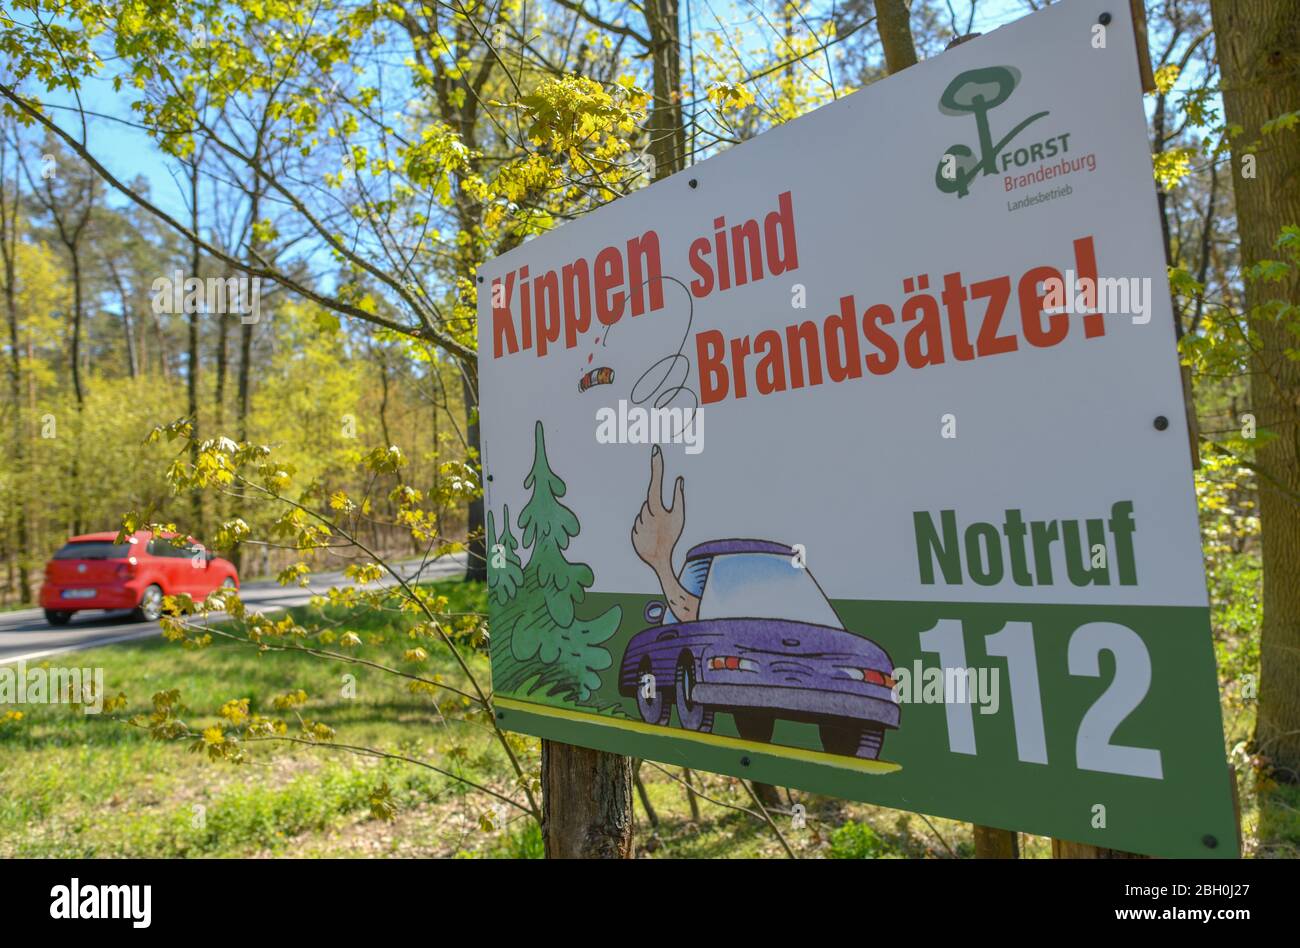 Waldsieversdorf, Germany. 22nd Apr, 2020. A sign from the Landesbetrieb Forst Brandenburg with the inscription 'Kippen sind Brandsätze! Notruf 112' is located on a country road in a forest in Märkische Schweiz. The dry and very sunny spring weather provides the highest forest fire danger level in wide regions of Brandenburg. Credit: Patrick Pleul/dpa-Zentralbild/ZB/dpa/Alamy Live News Stock Photo